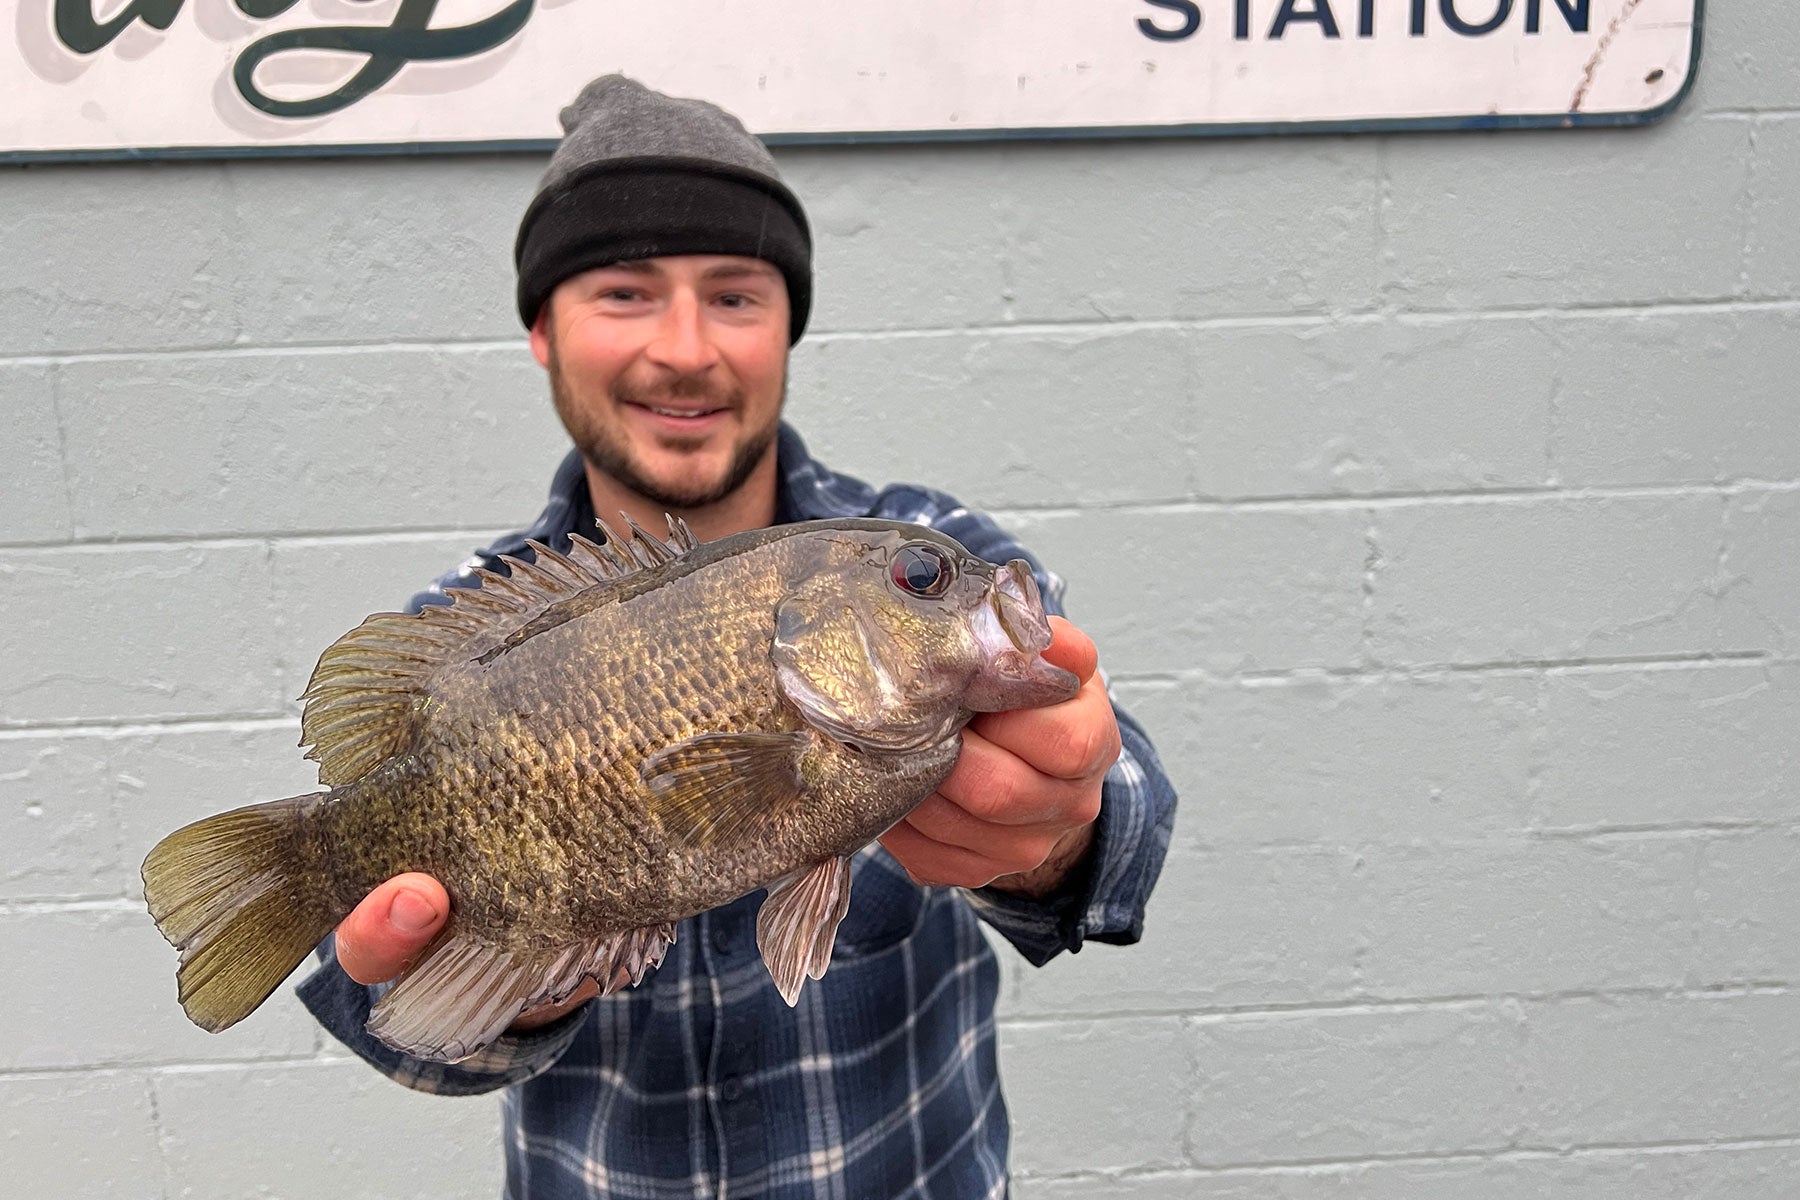 maryland angler's rock bass ties state record set nearly 30 years ago